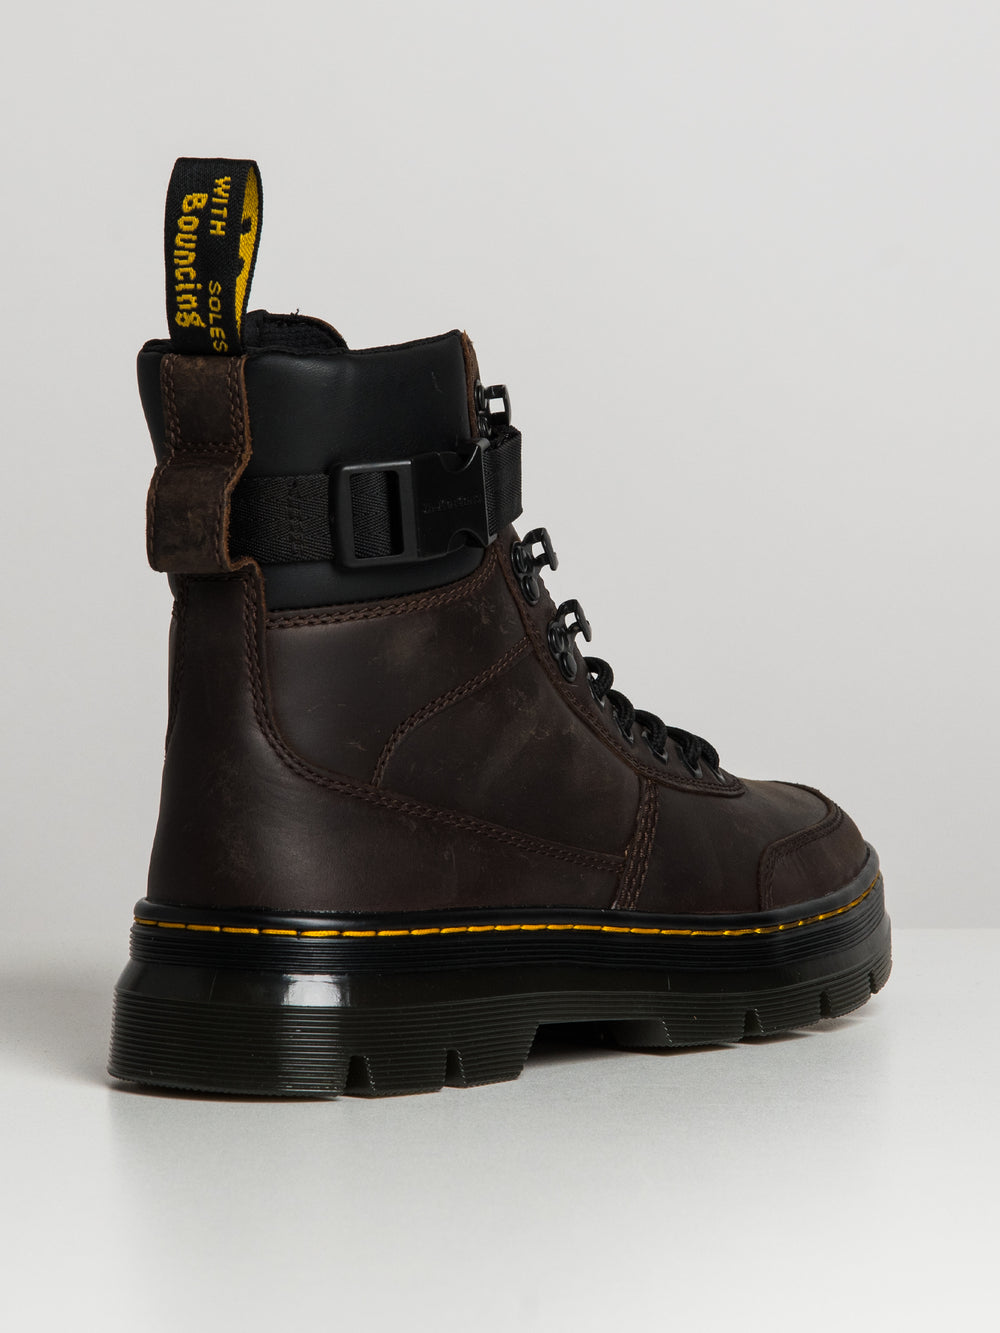 MENS DR MARTENS COMBS TECH LEATHER CRAZY HORSE BOOTS